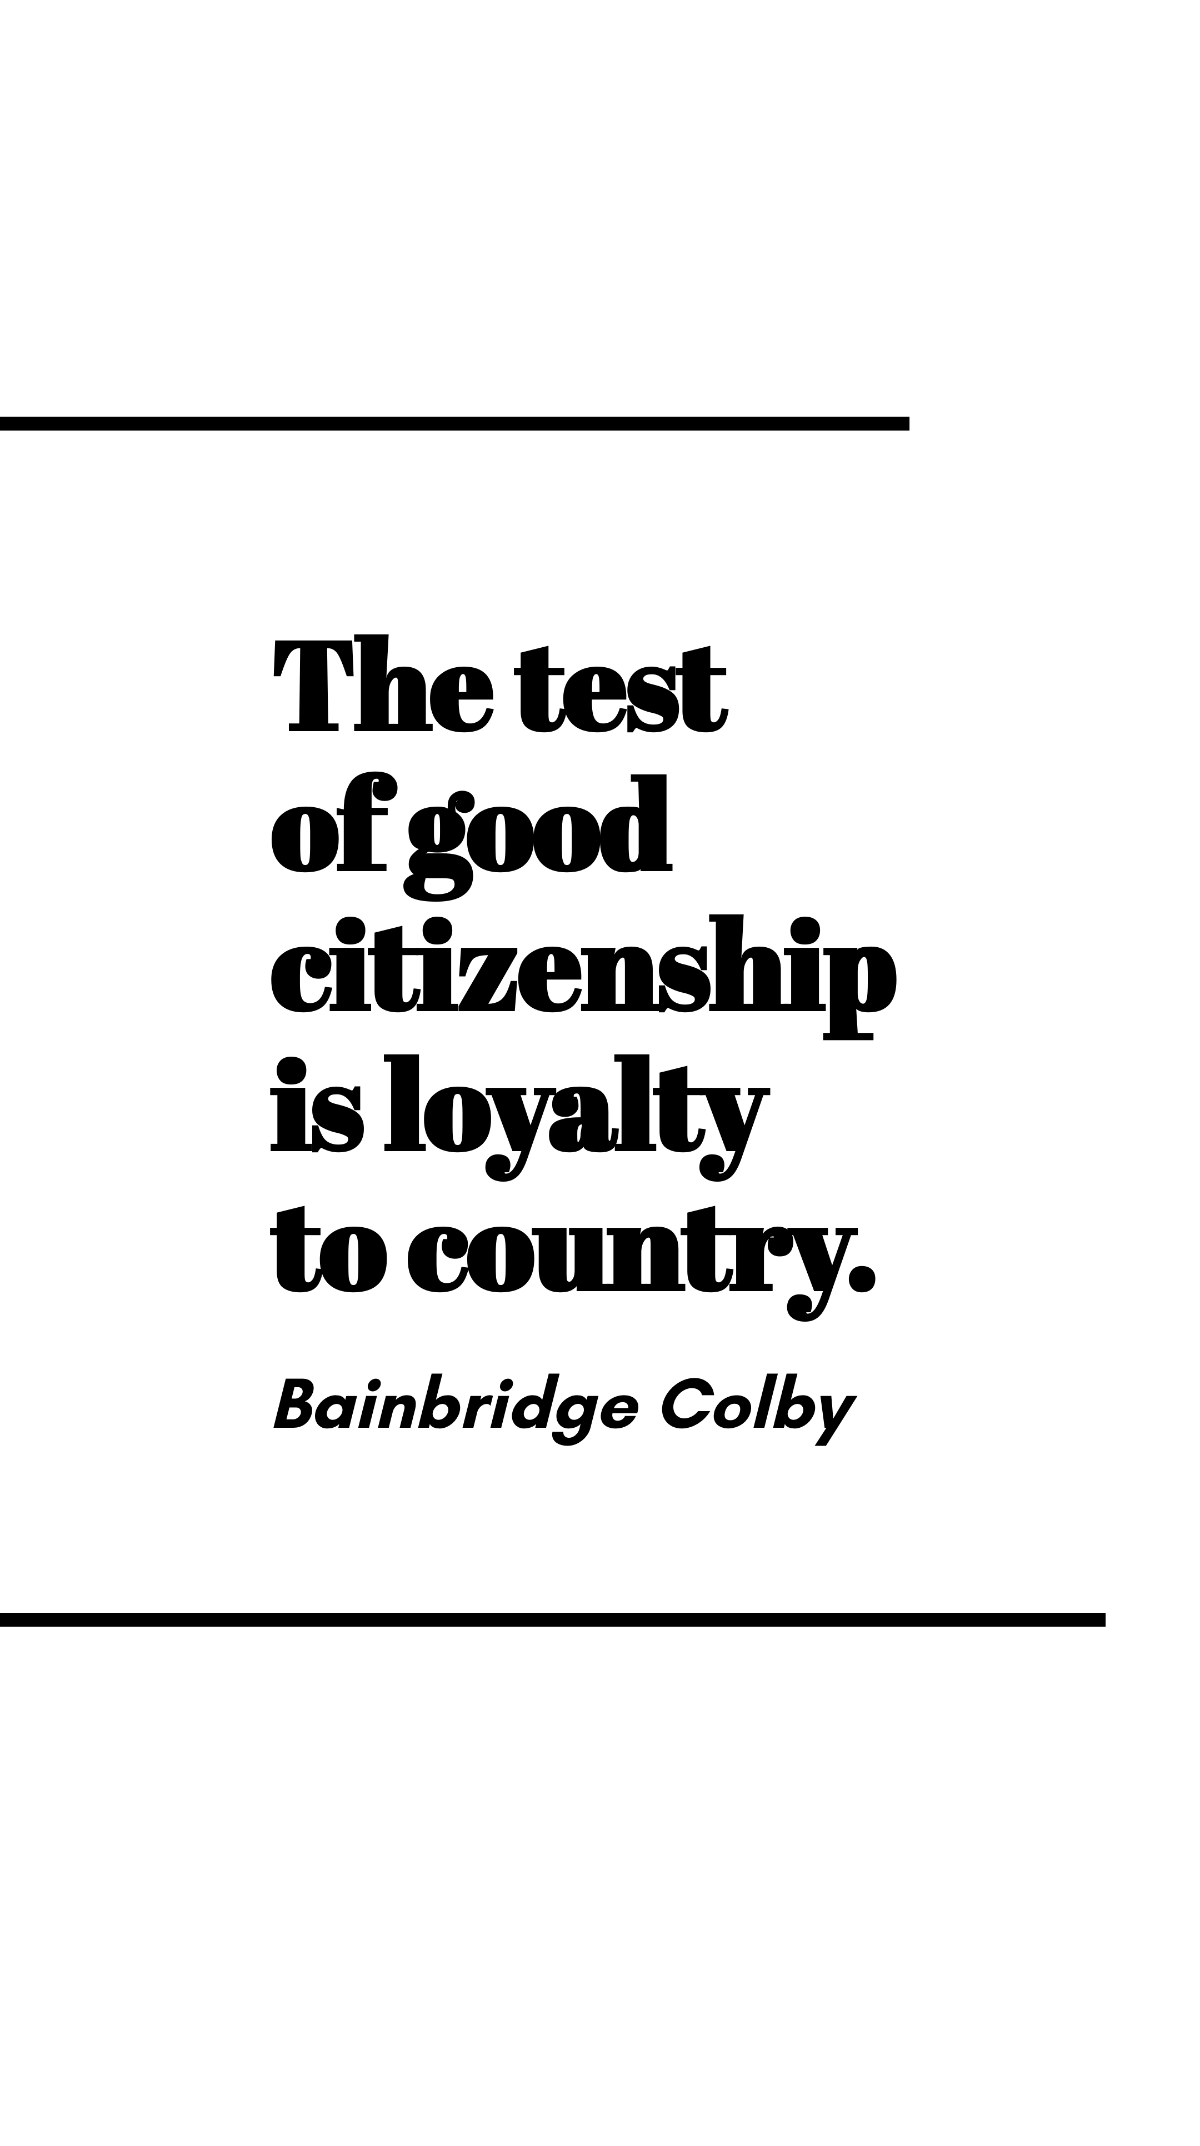 Free Bainbridge Colby - The test of good citizenship is loyalty to country. Template